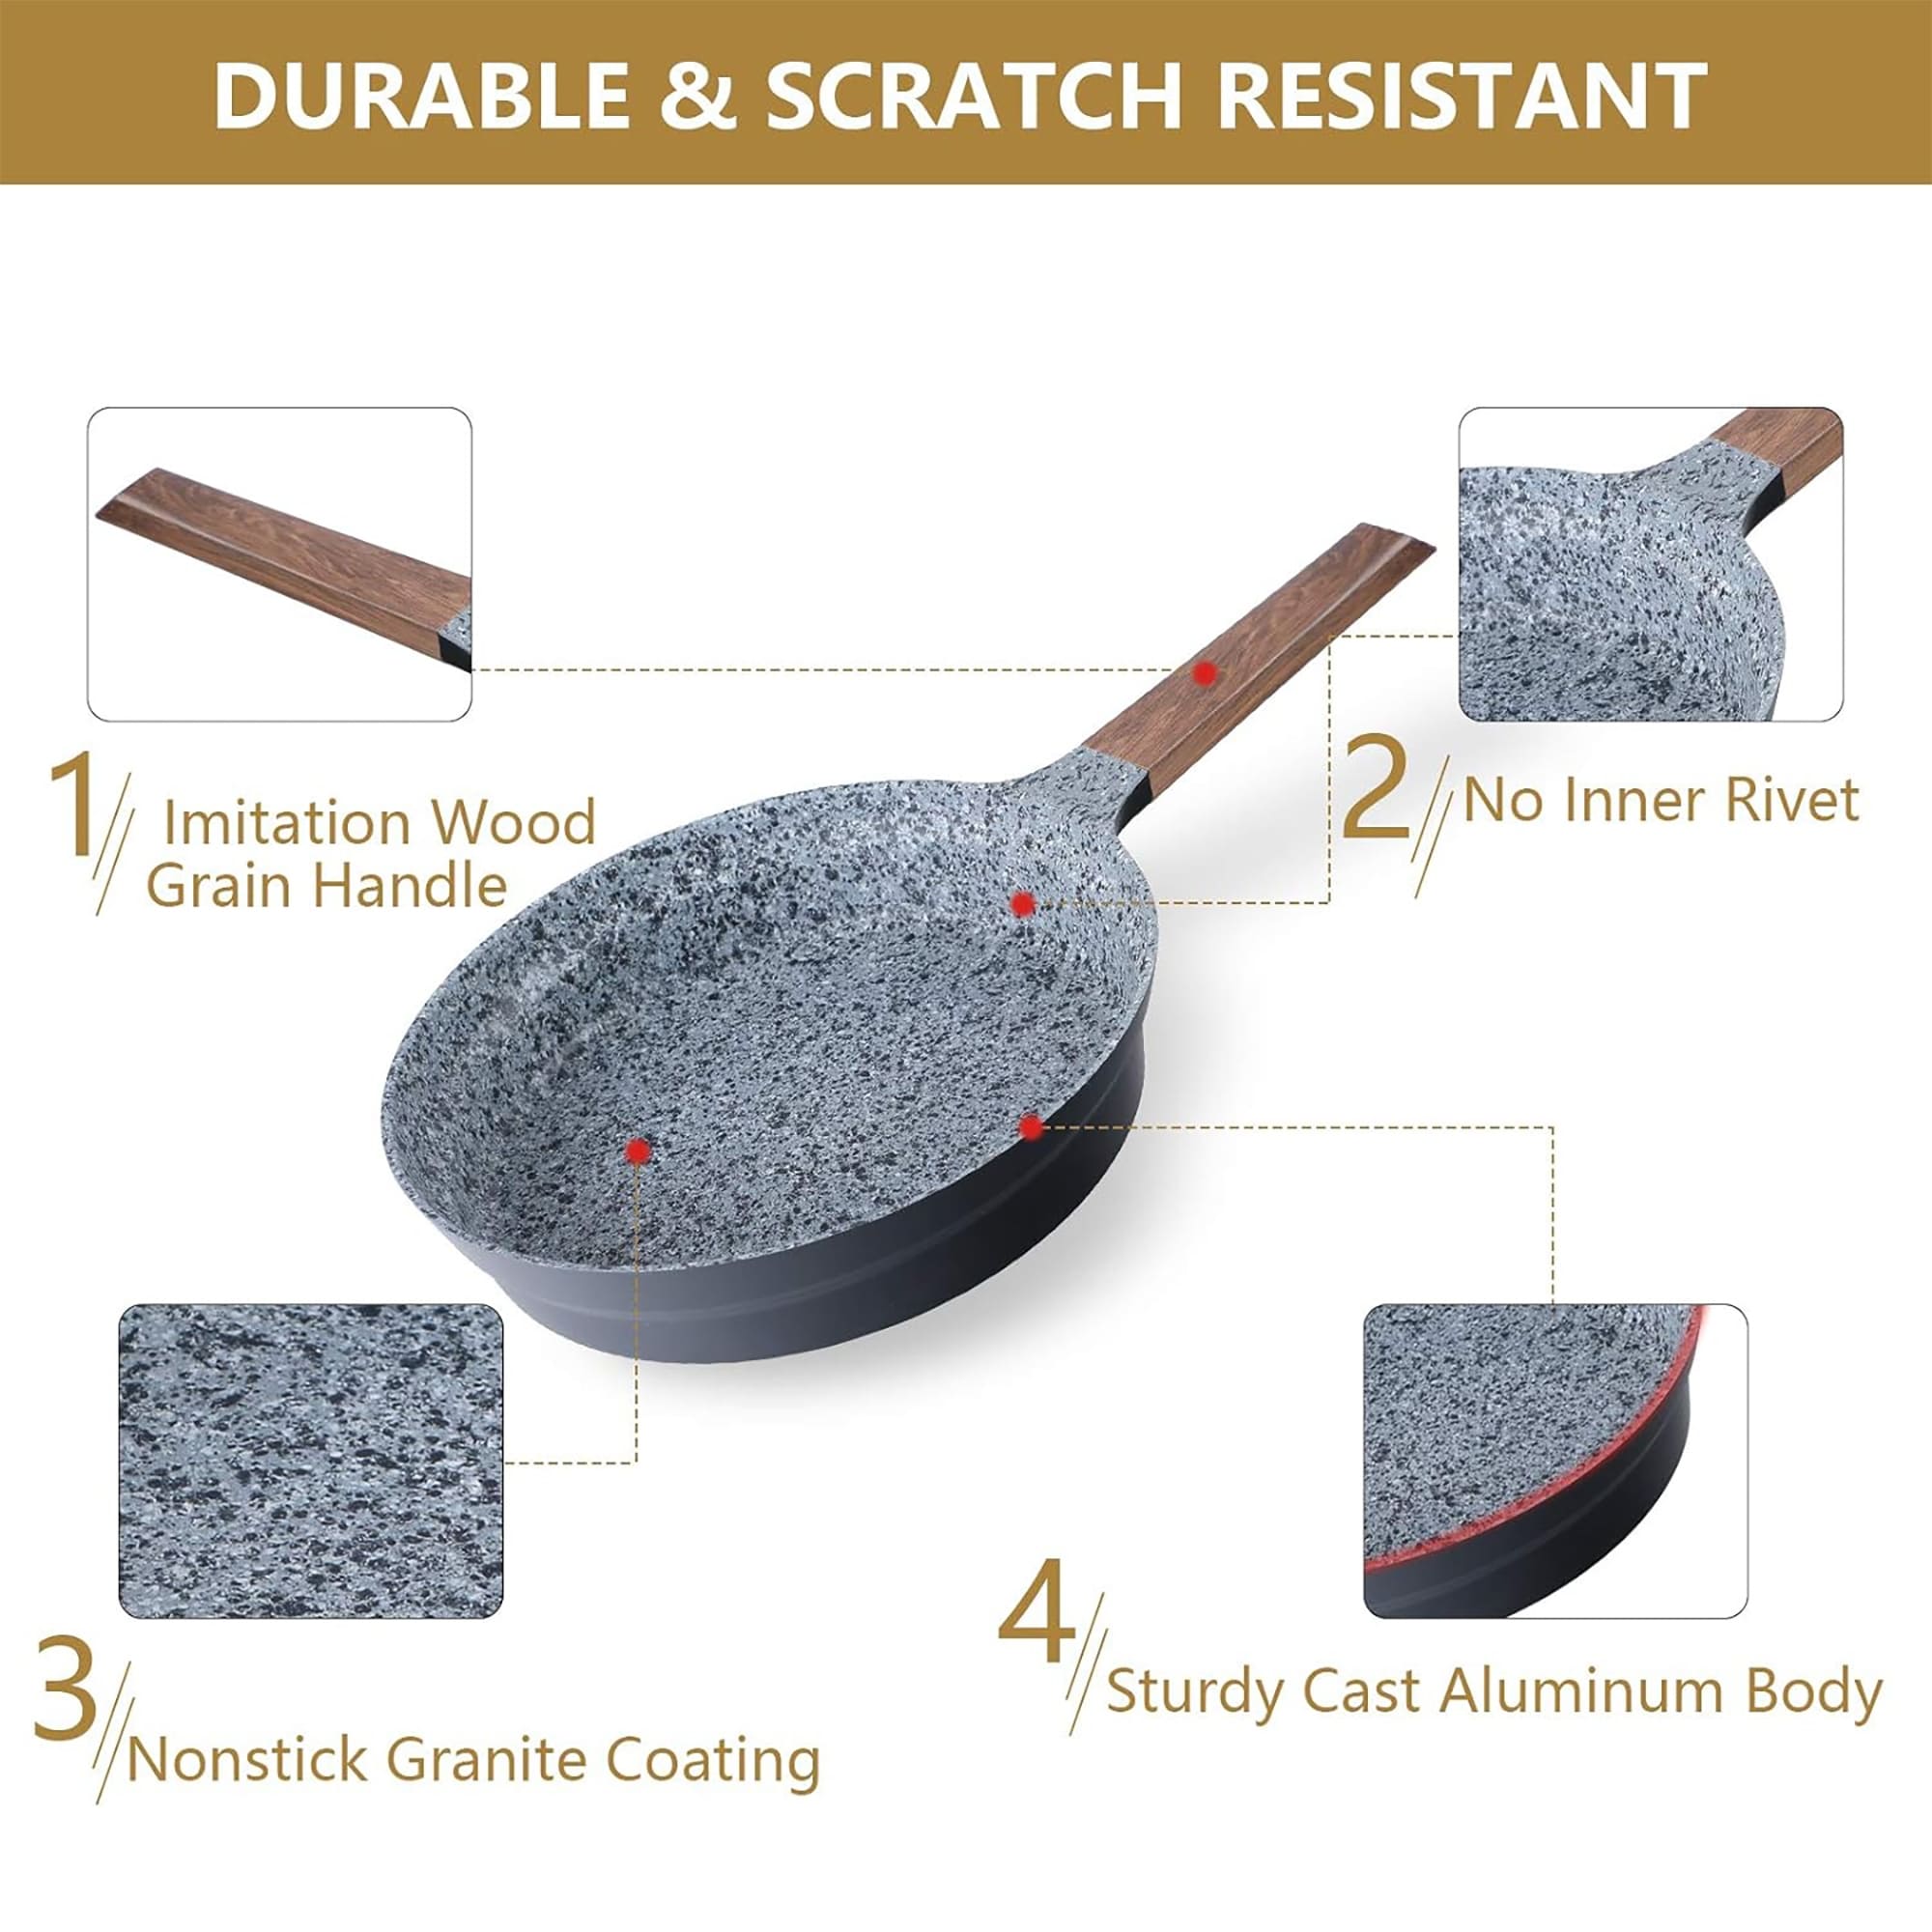 https://ak1.ostkcdn.com/images/products/is/images/direct/1a0a07373484e4ae183d8bda27da562e16287467/Kitchen-Academy-12-Piece-Nonstick-Granite-Stone-Cookware-Pots-and-Pans-Set-with-4-PC-Silicone-Hot-Handle-Holder%2C-Induction-Set.jpg